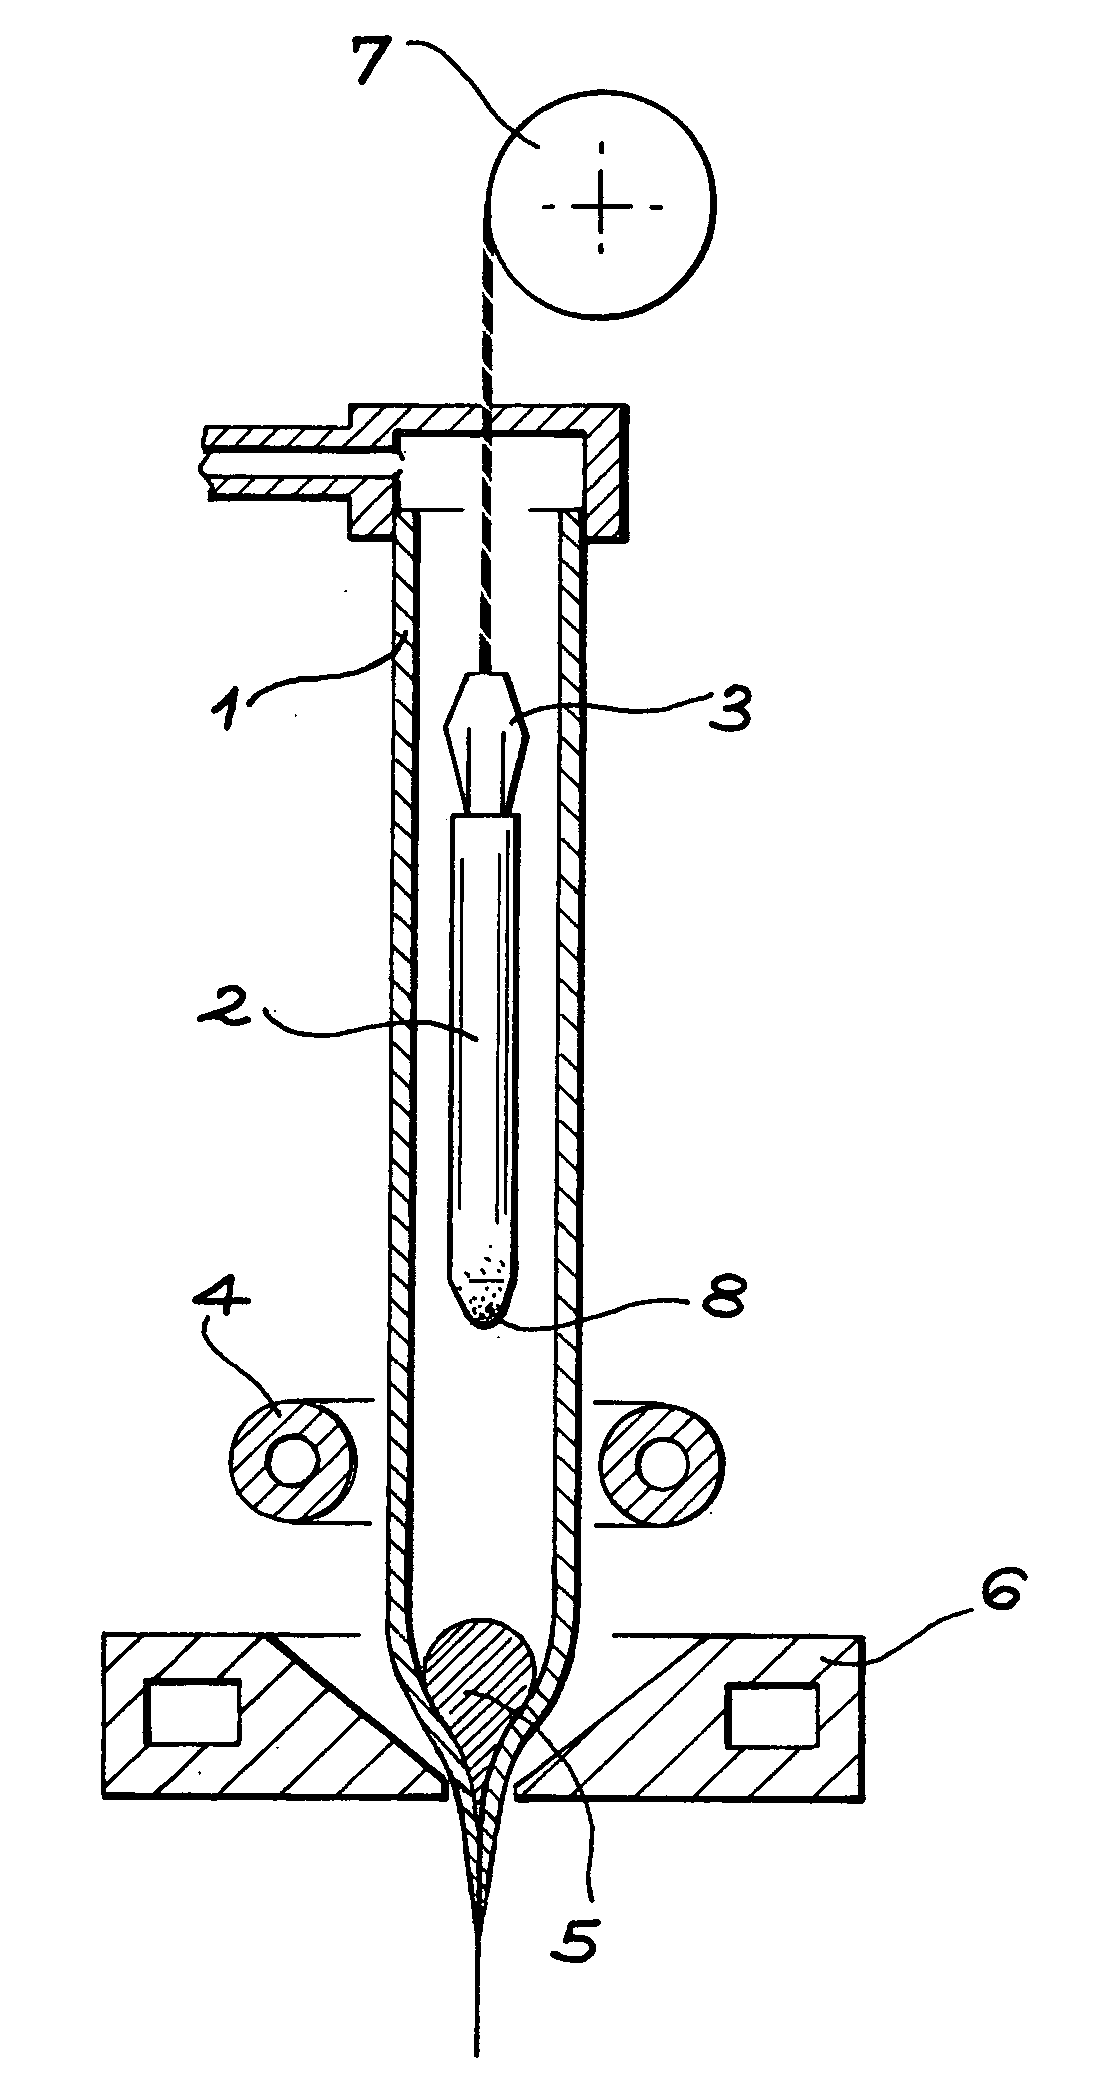 Method and device for continuous production of glass-sheathed metal wires